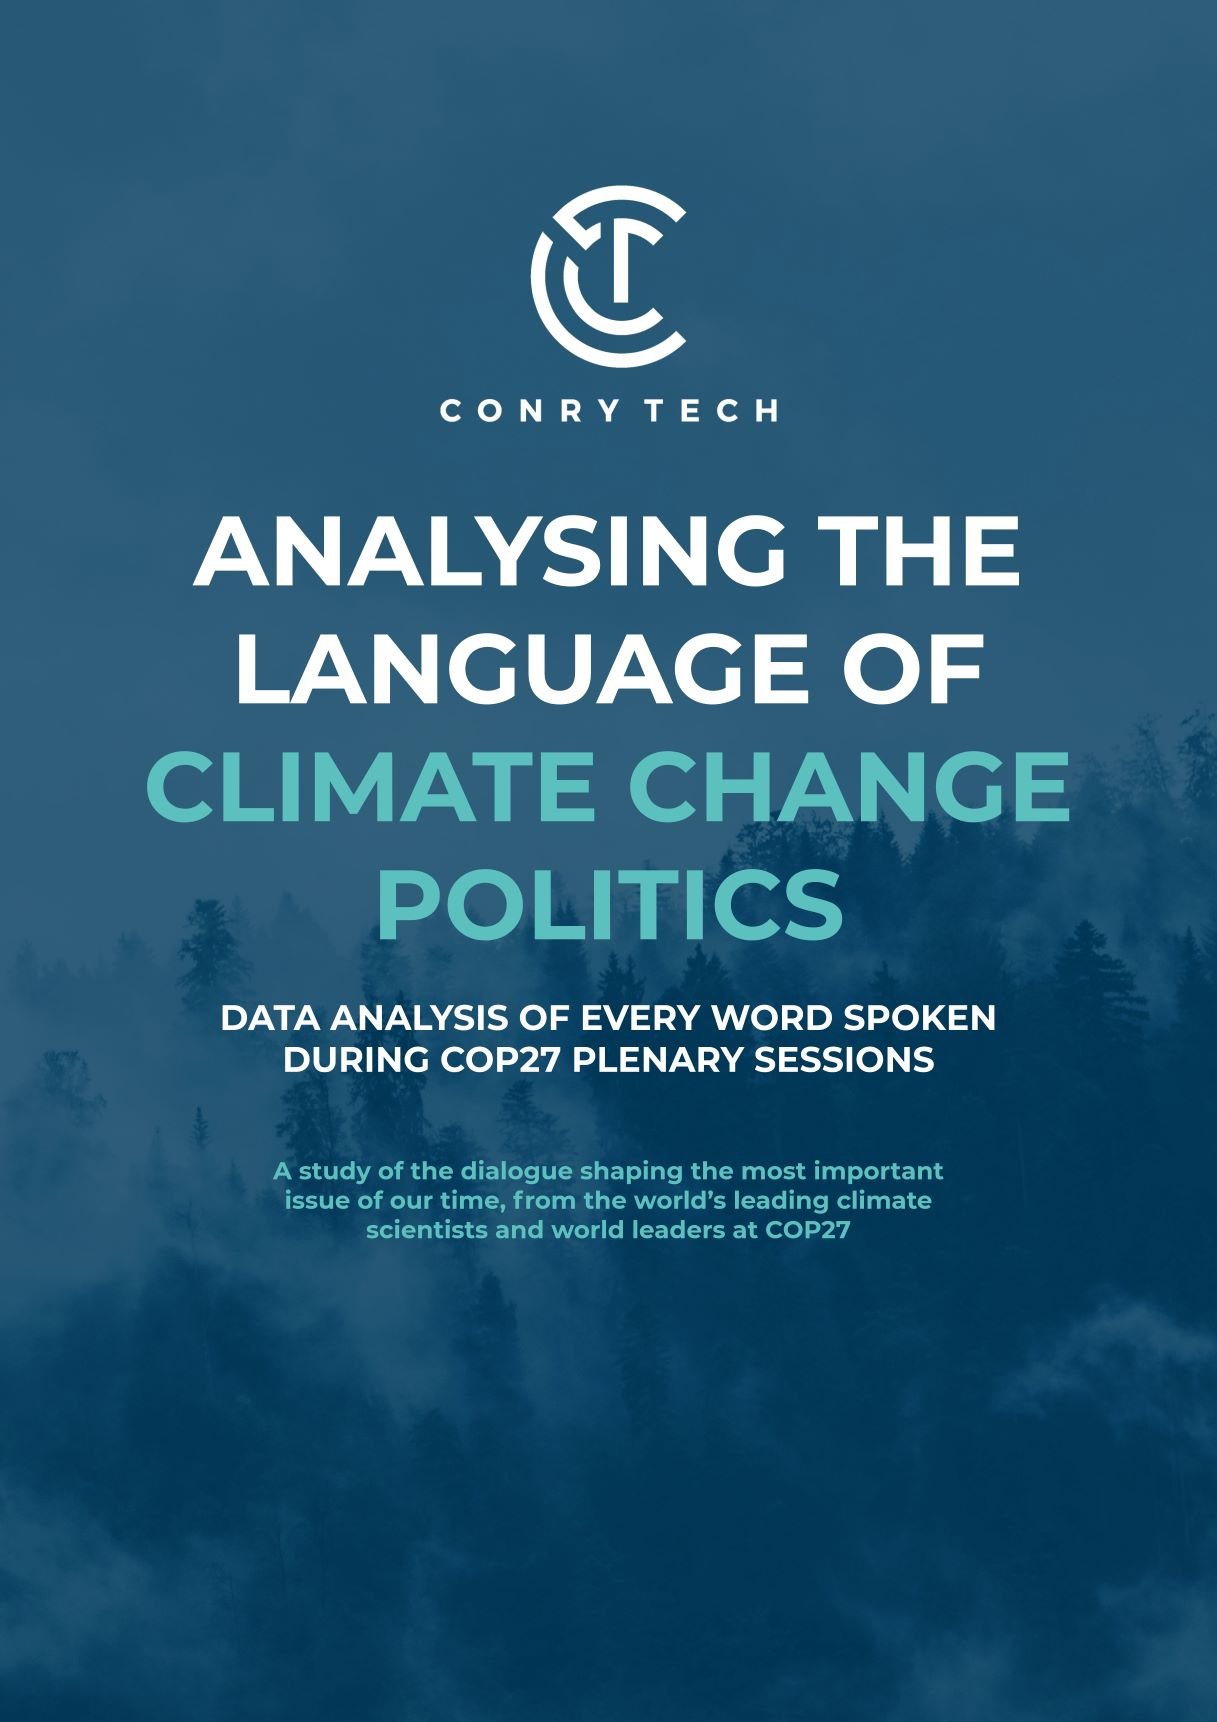 CONRY_Analysing the language of climate change politics_published_Page_01.jpg